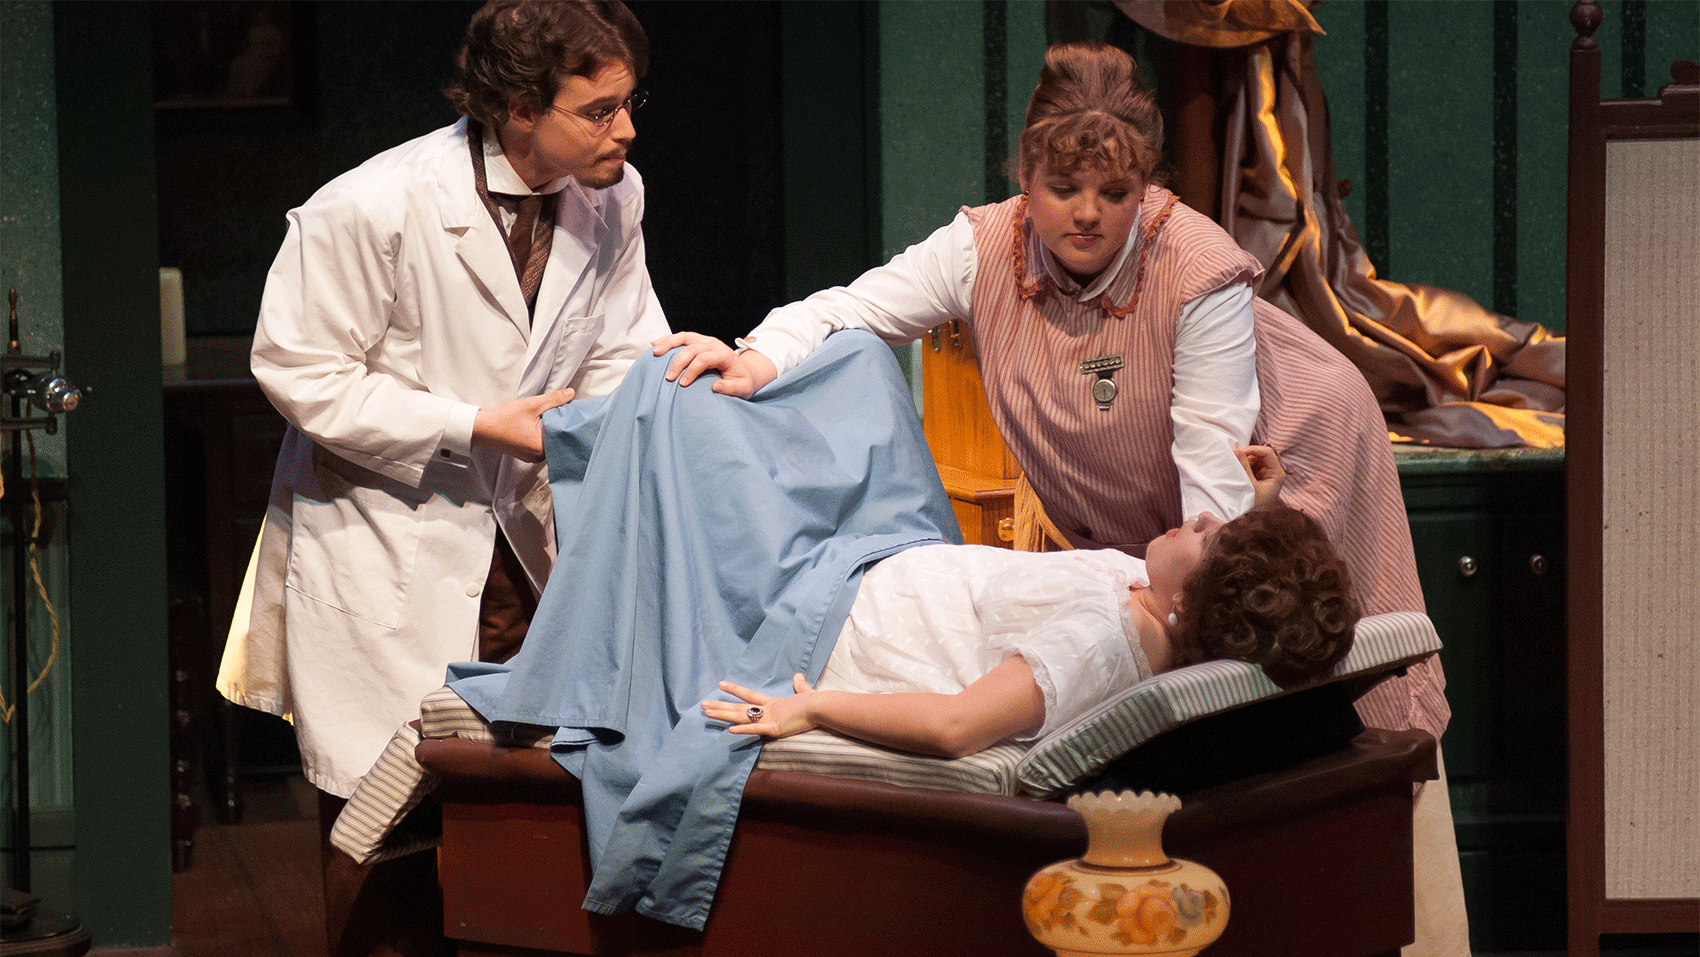 A woman laying down on a medical bed while a doctor and nurse attend to her